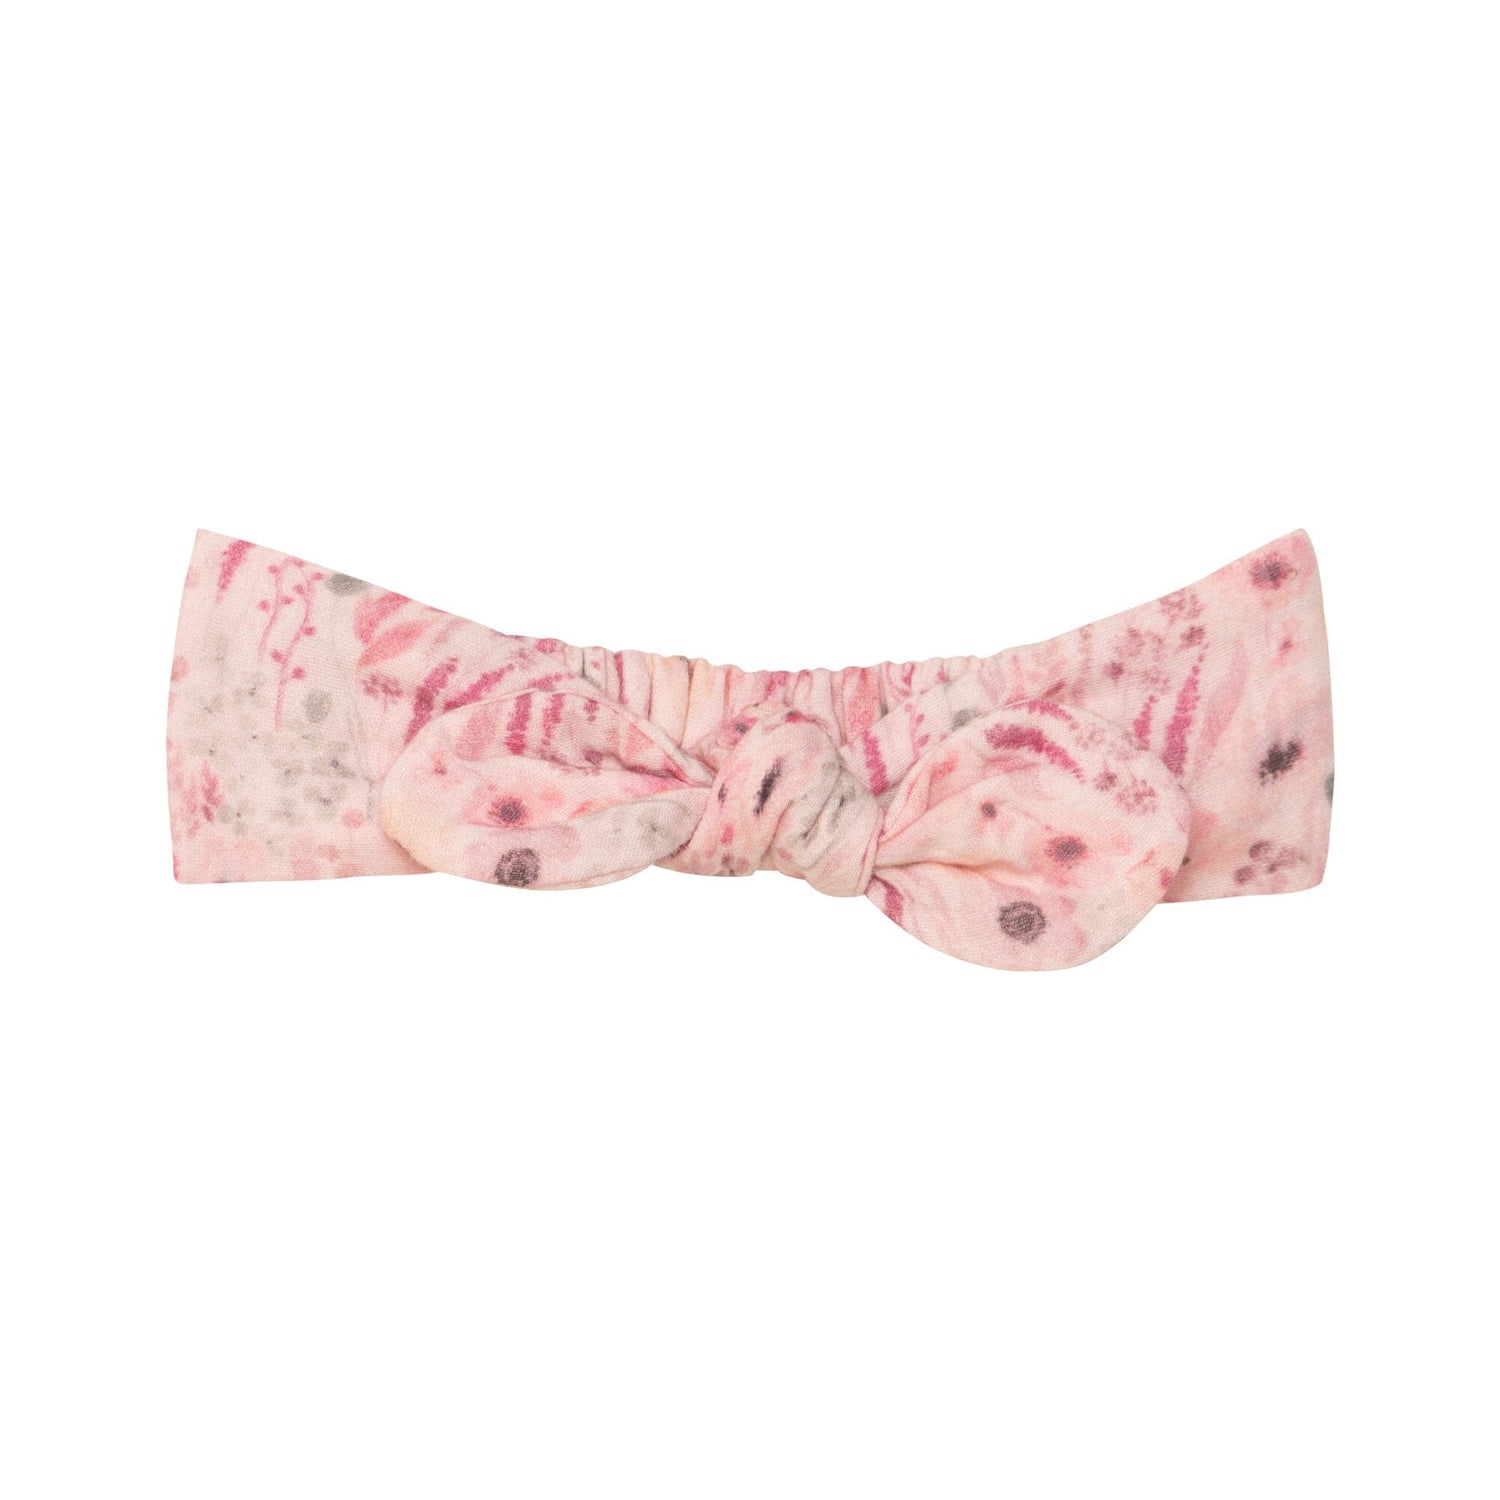 Printed Knotted Headband Pink Watercolor Flowers - E30EHB_042